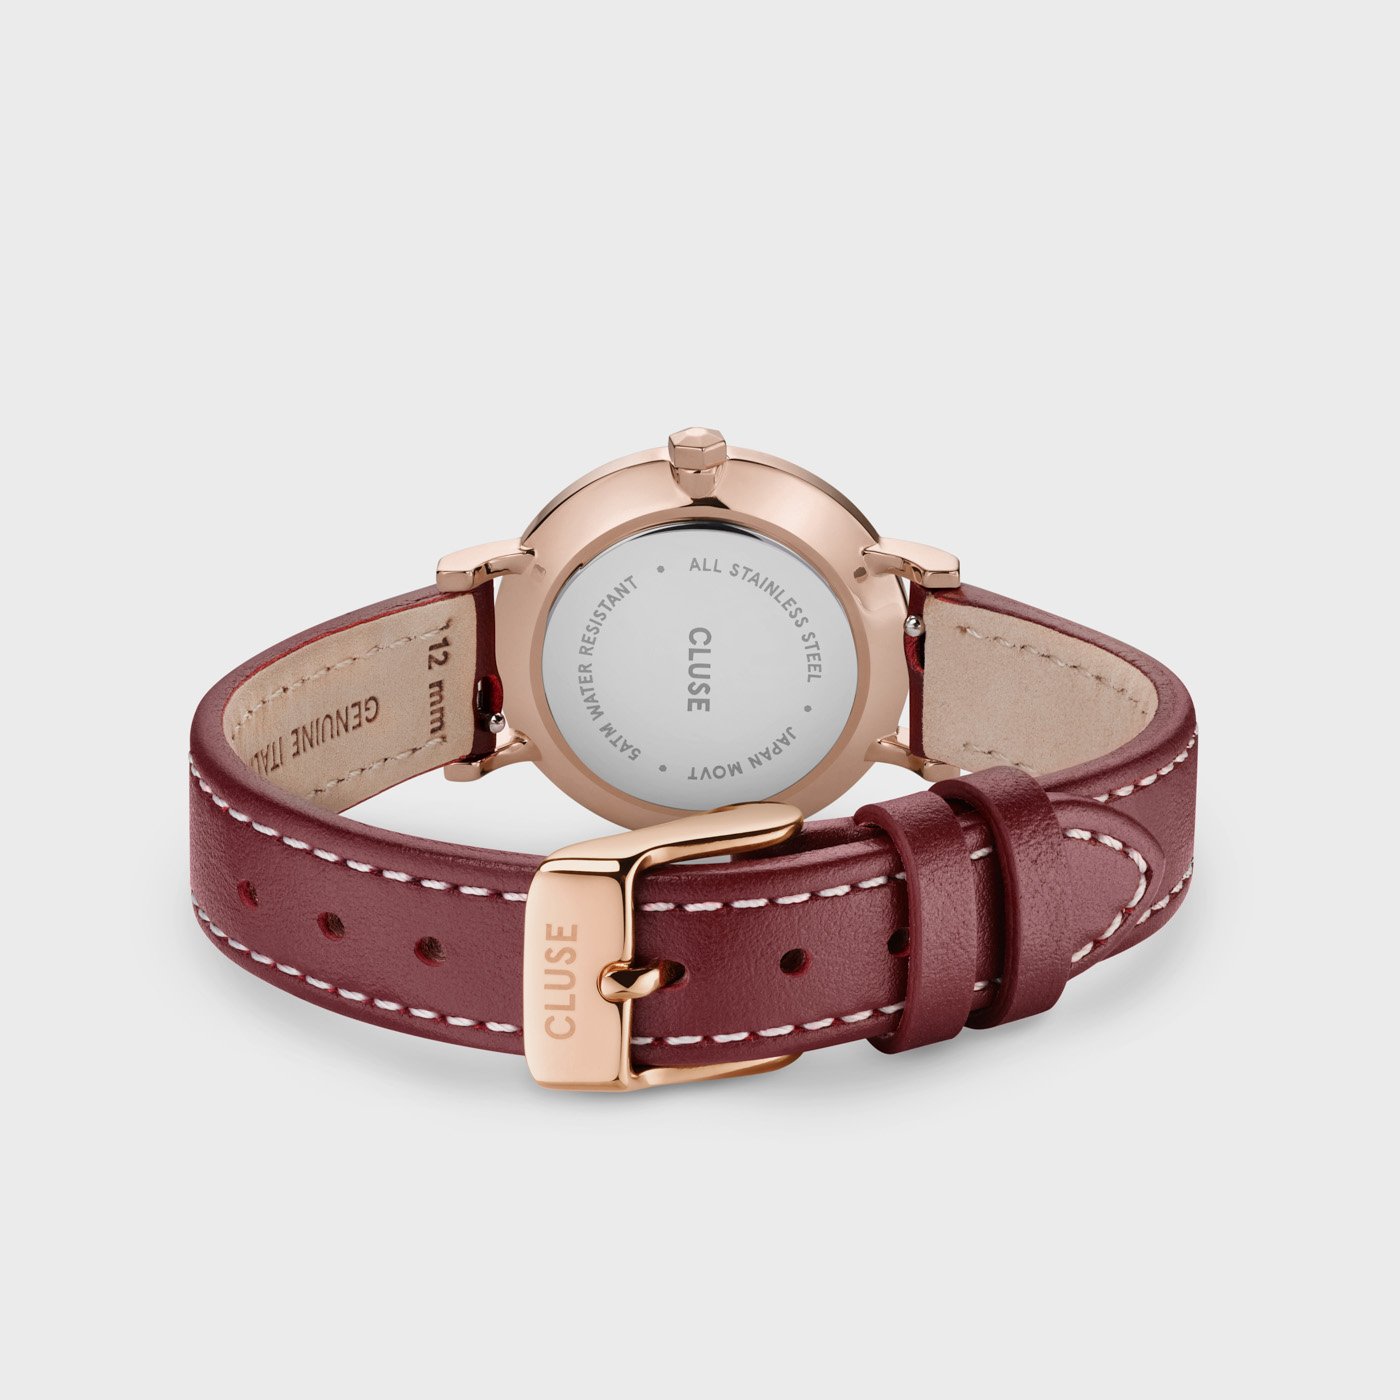 CLUSE Boho Chic Petite Watch CW10504 Dark Red/Rose Gold Colour